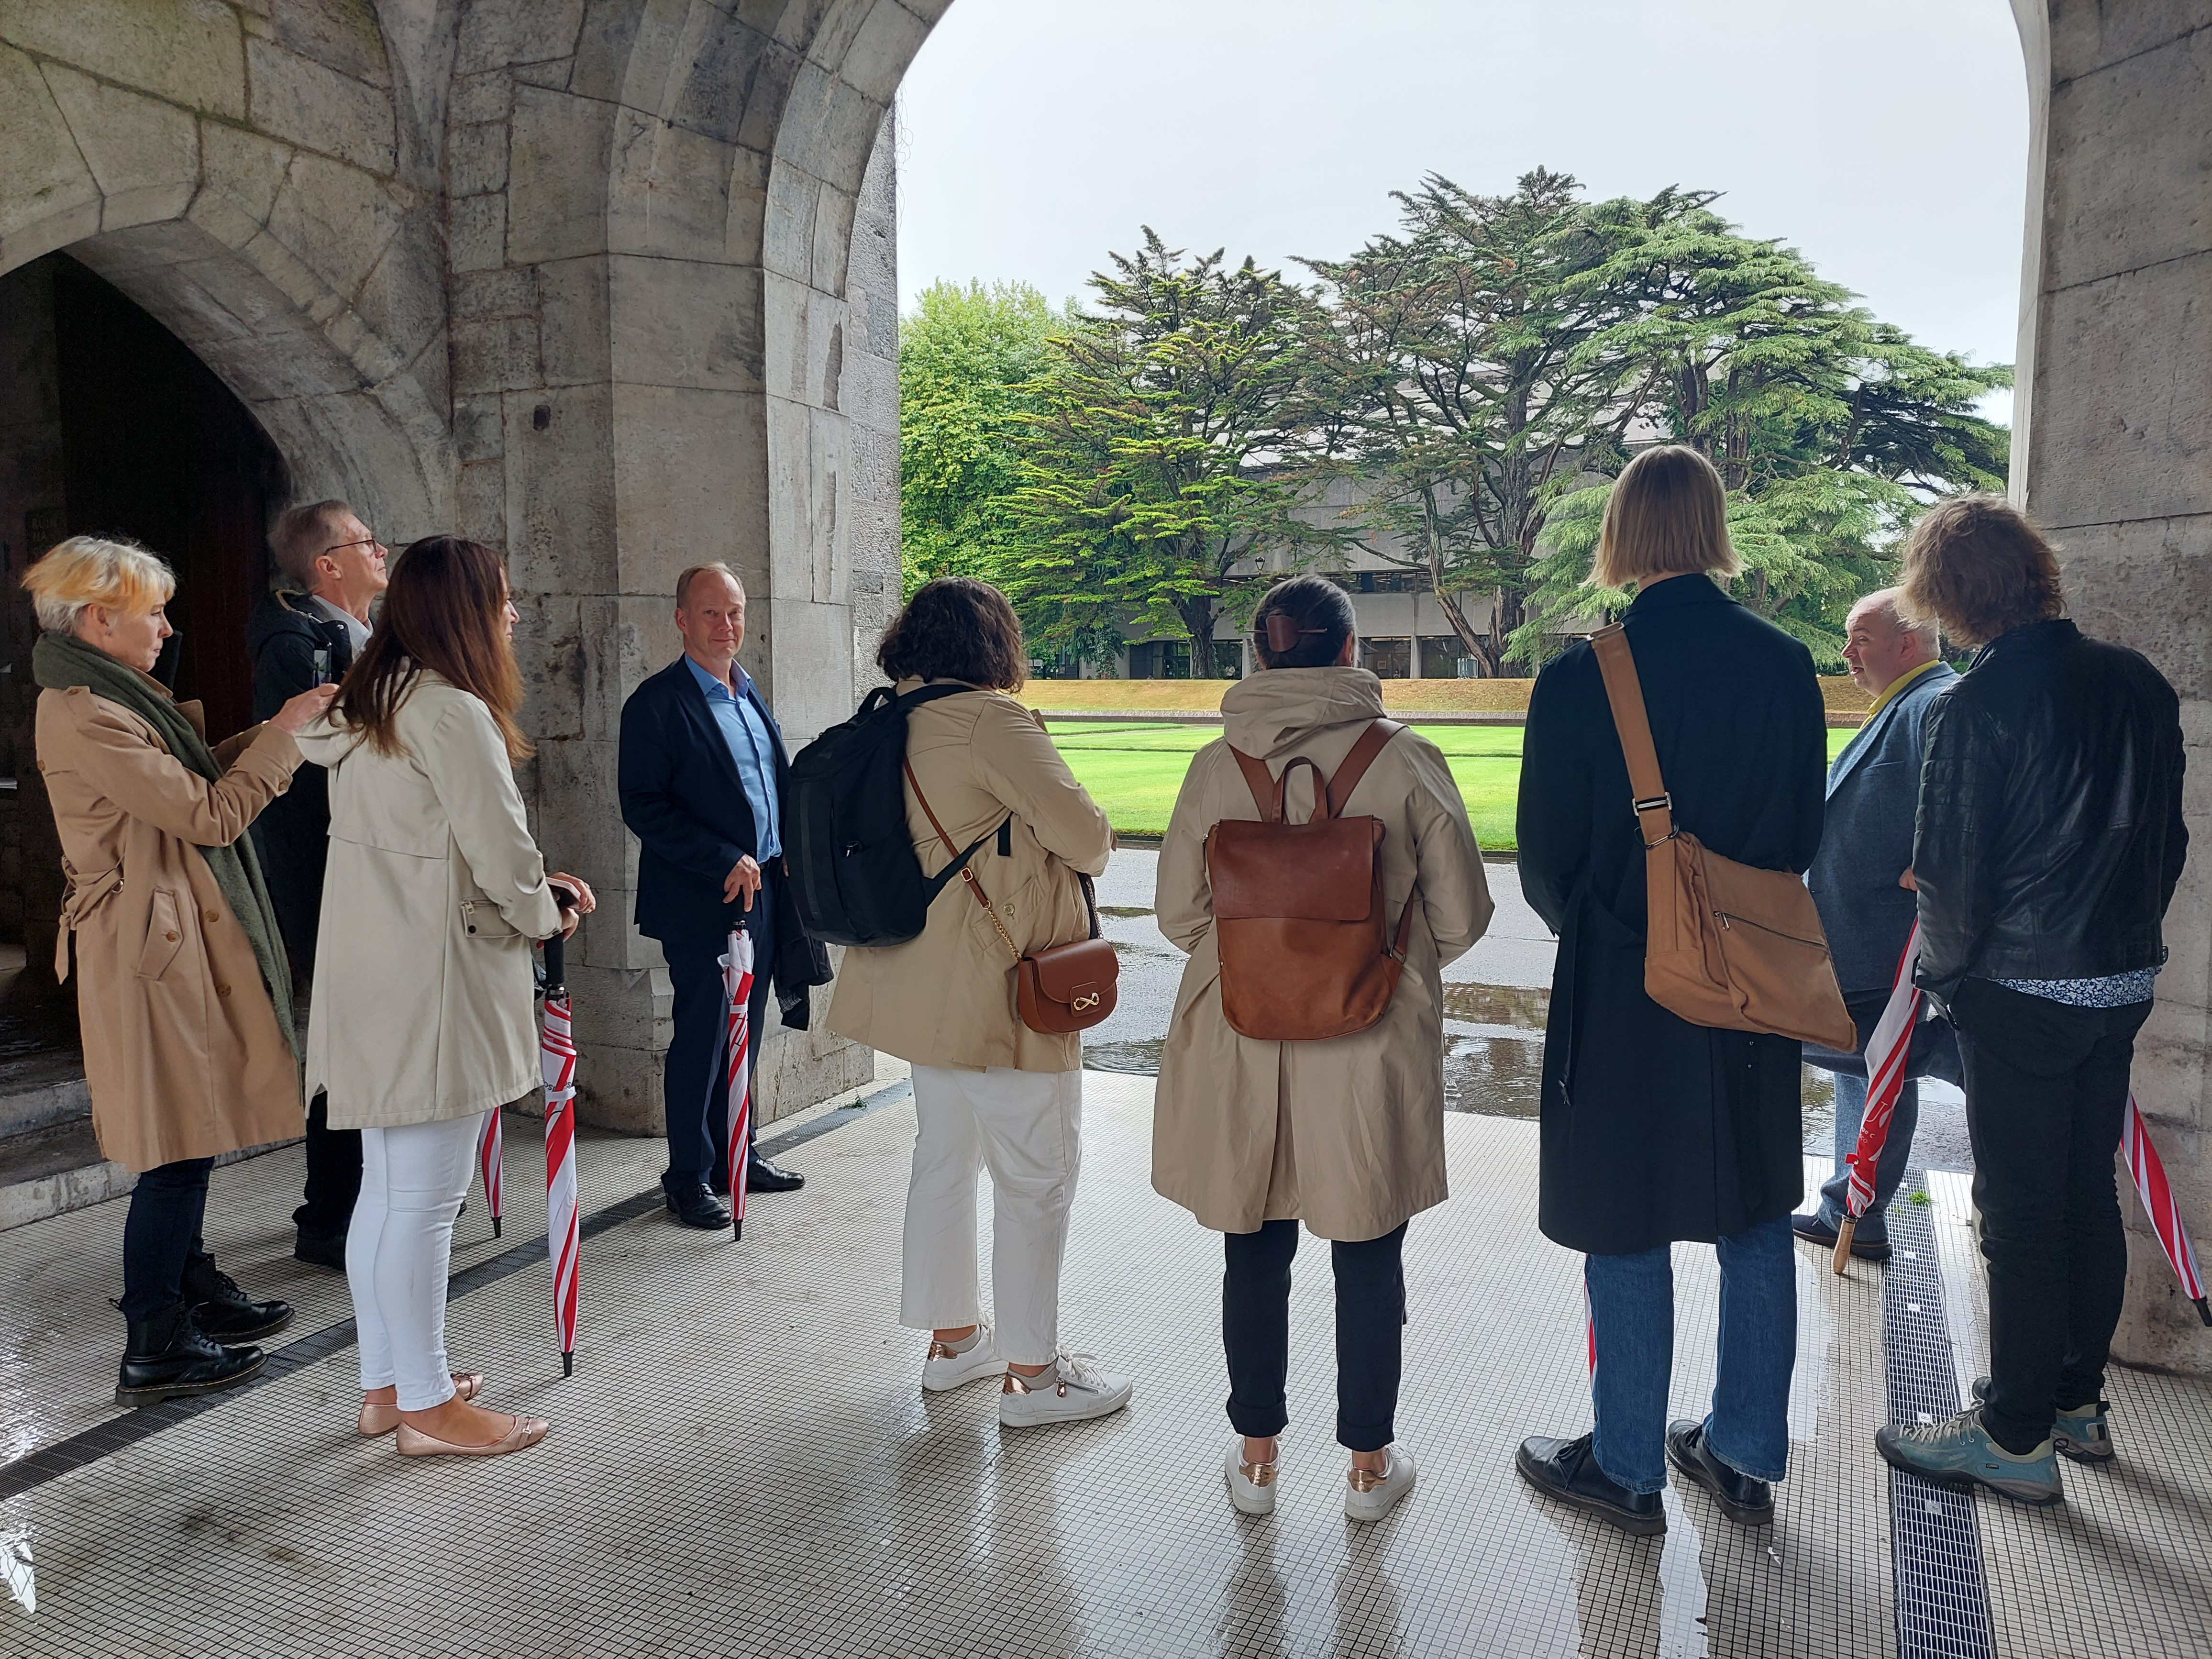 A group of people on a campus tour